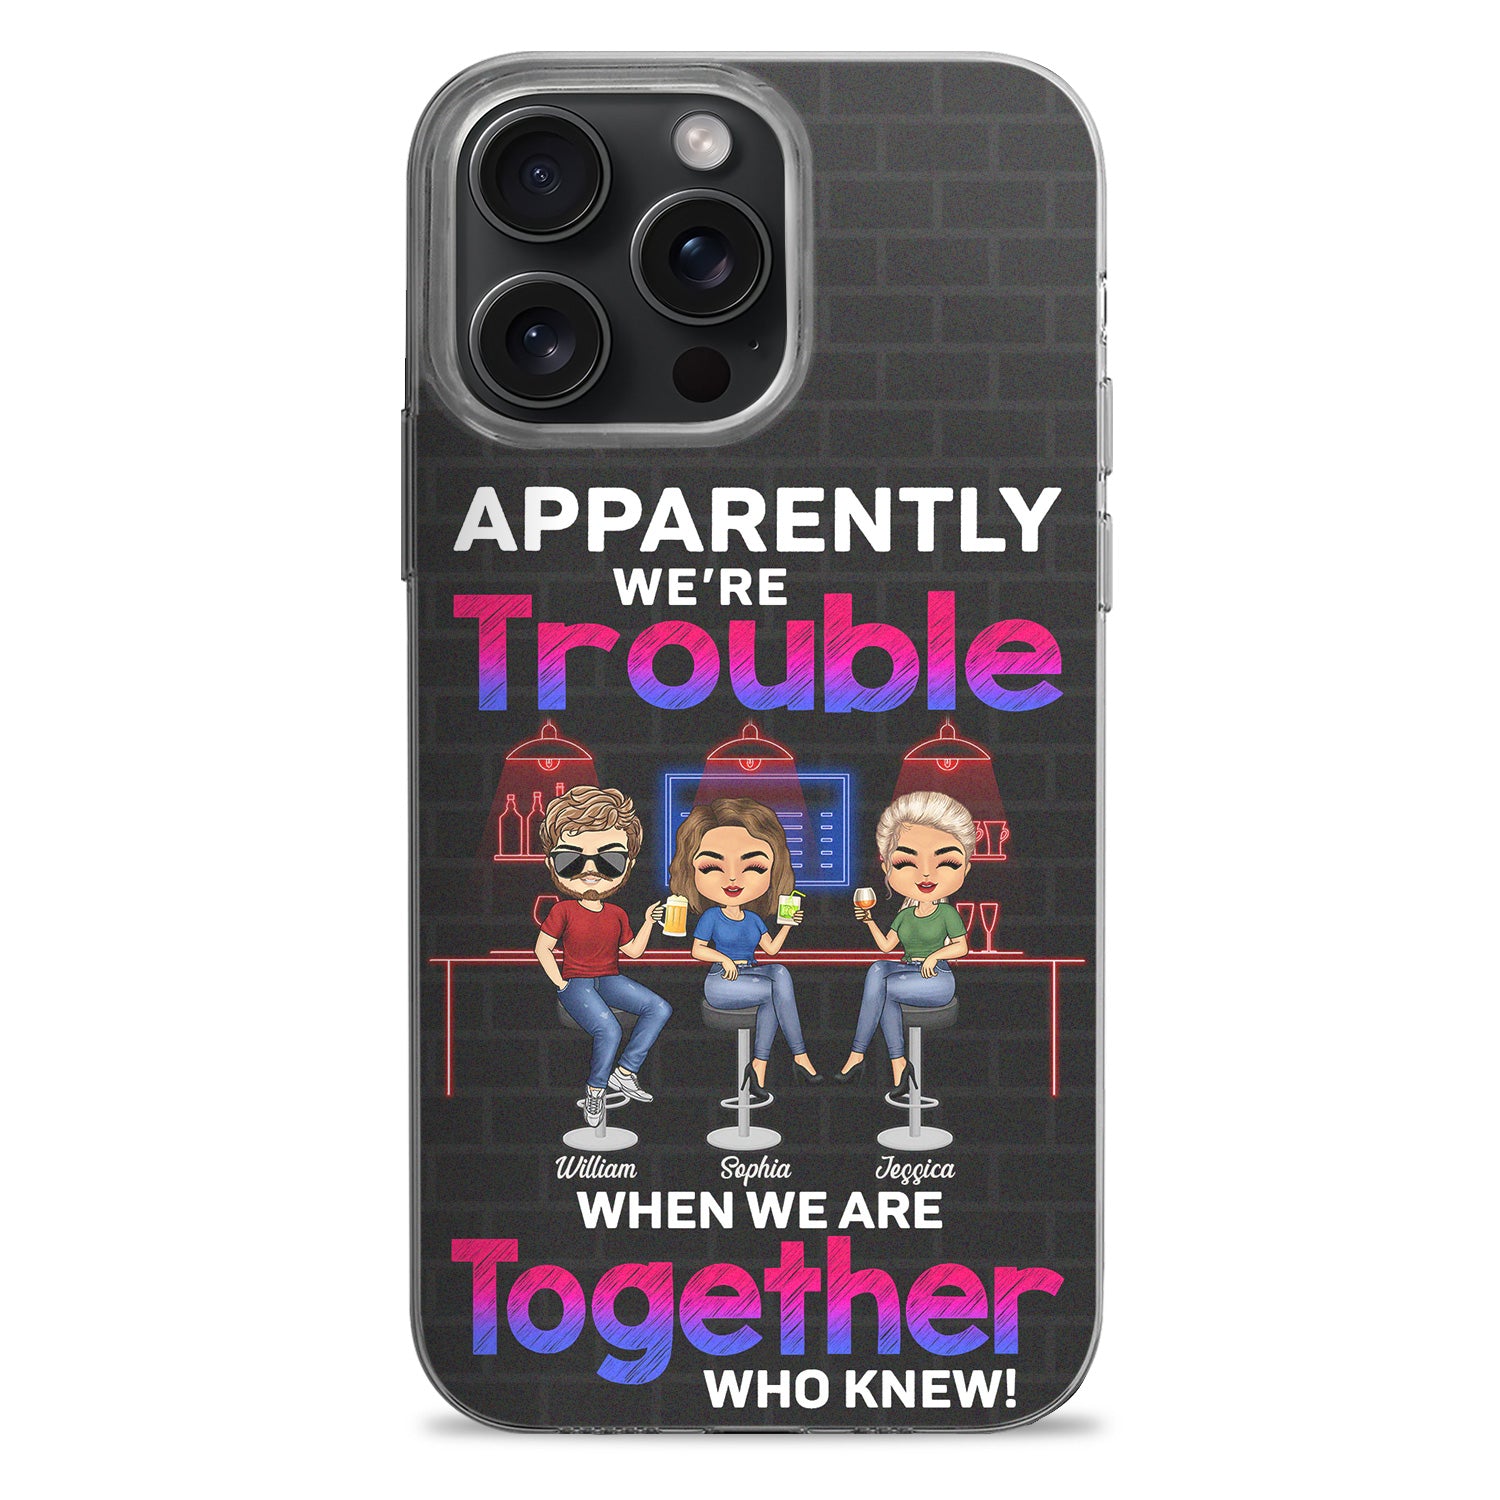 Apparently We're Trouble When We Are Together Who Knew - Gift For Best Friends, Besties - Personalized Clear Phone Case